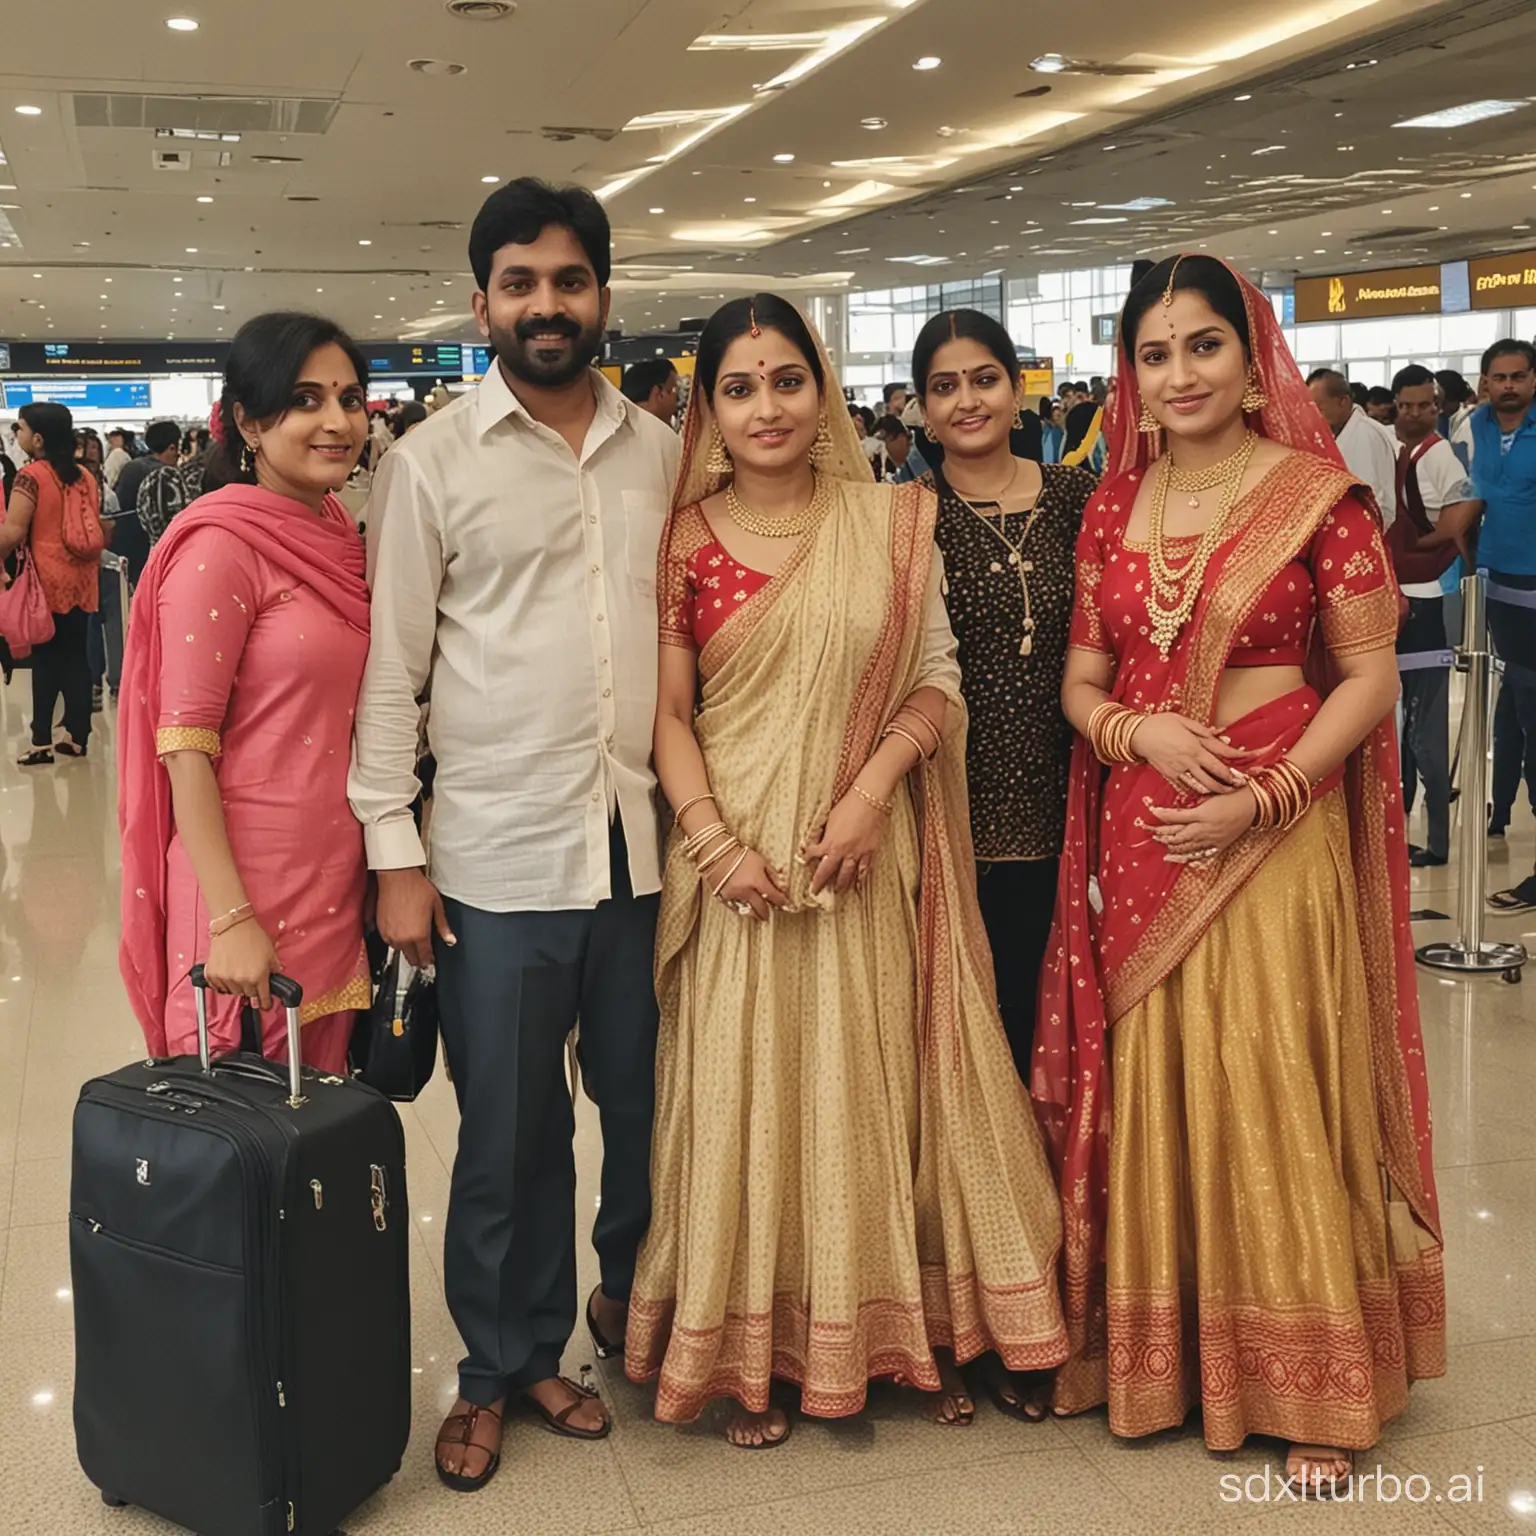 Indian wife, husband, mother in law and fat7her in law standing at airport